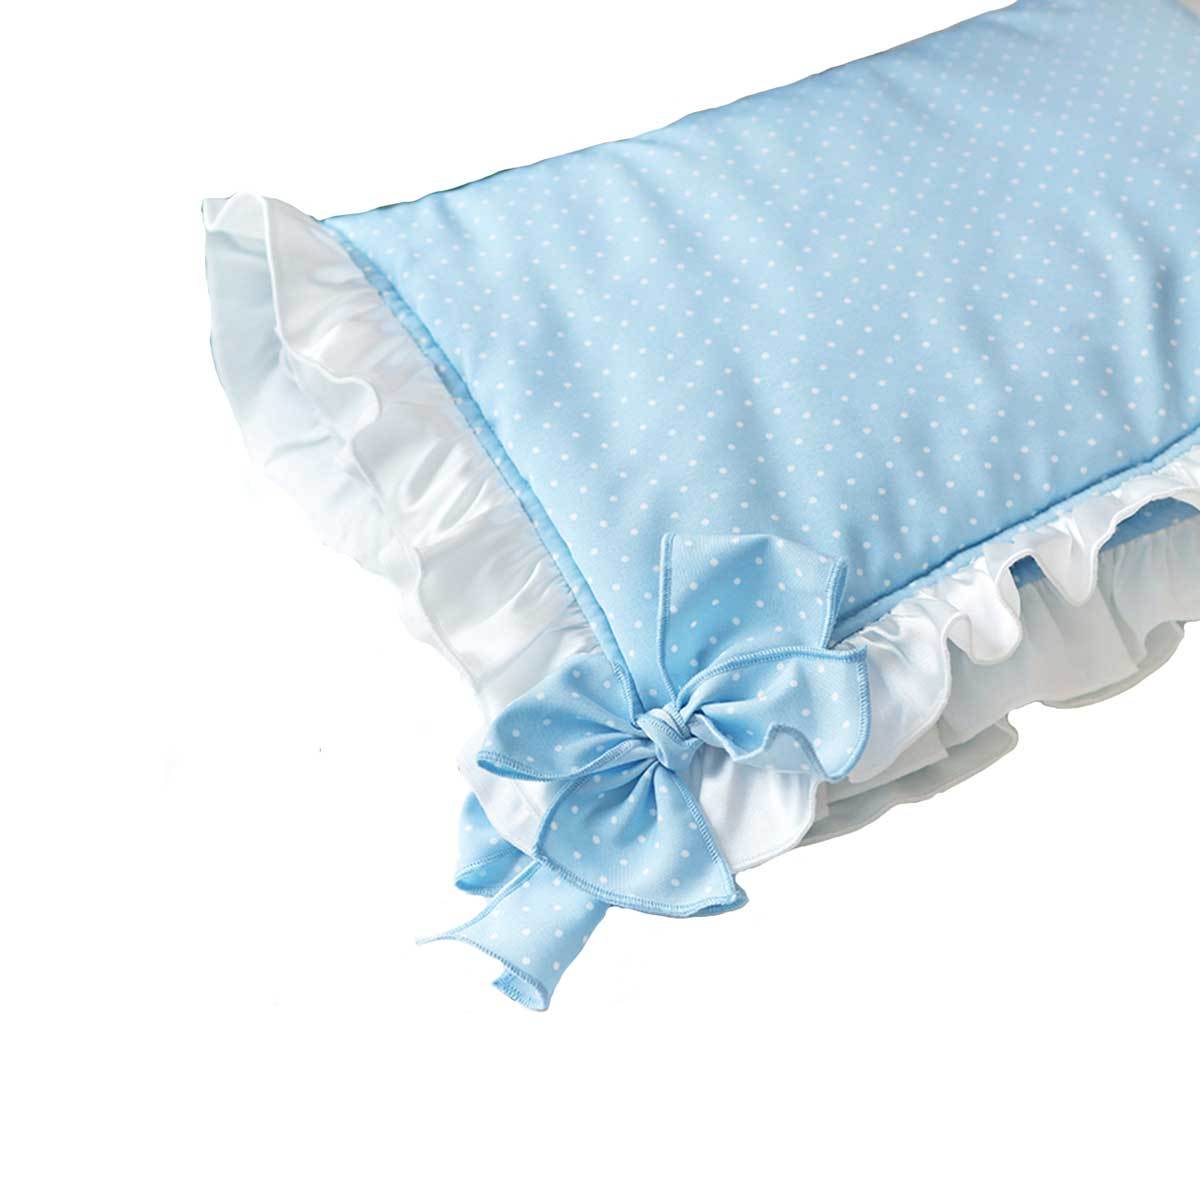 Vacay Dreaming Dog Blanket in Blue | Pawlicious & Company